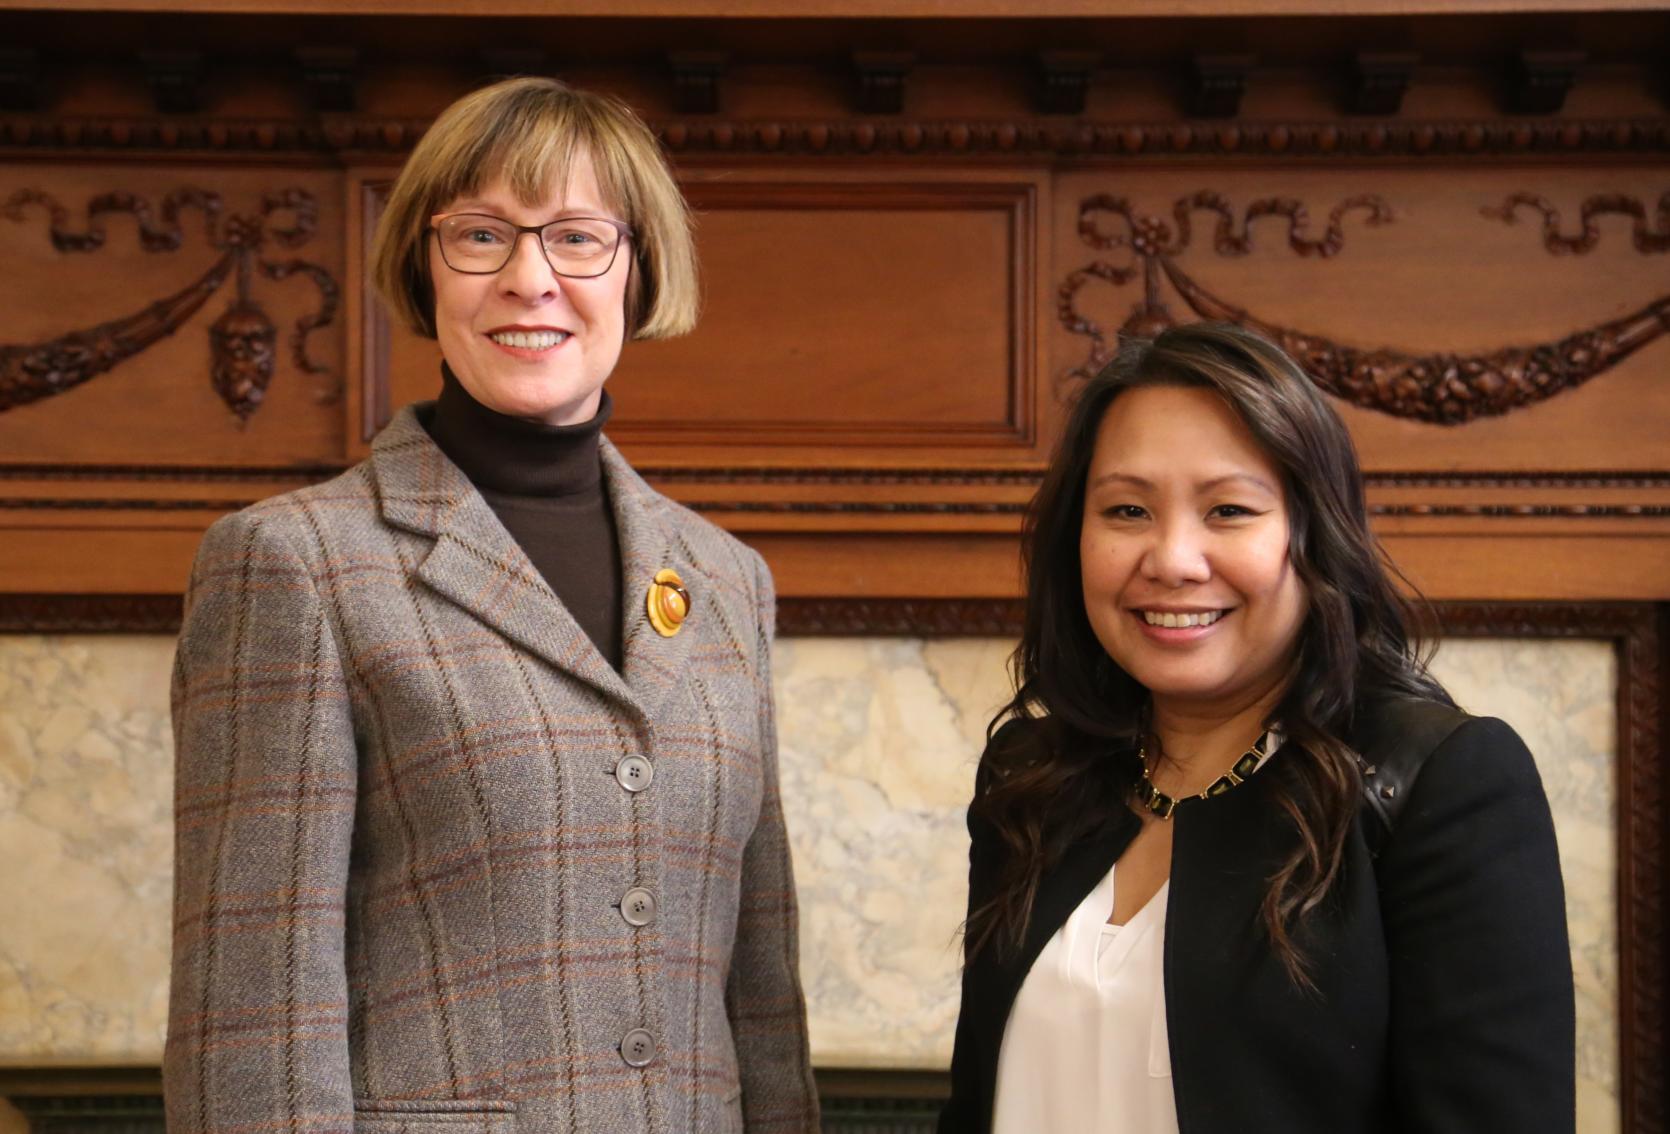 State Auditor Suzanne M. Bump recently appointed Tyngsborough resident Bora Chiemruom to the Asian American Commission.